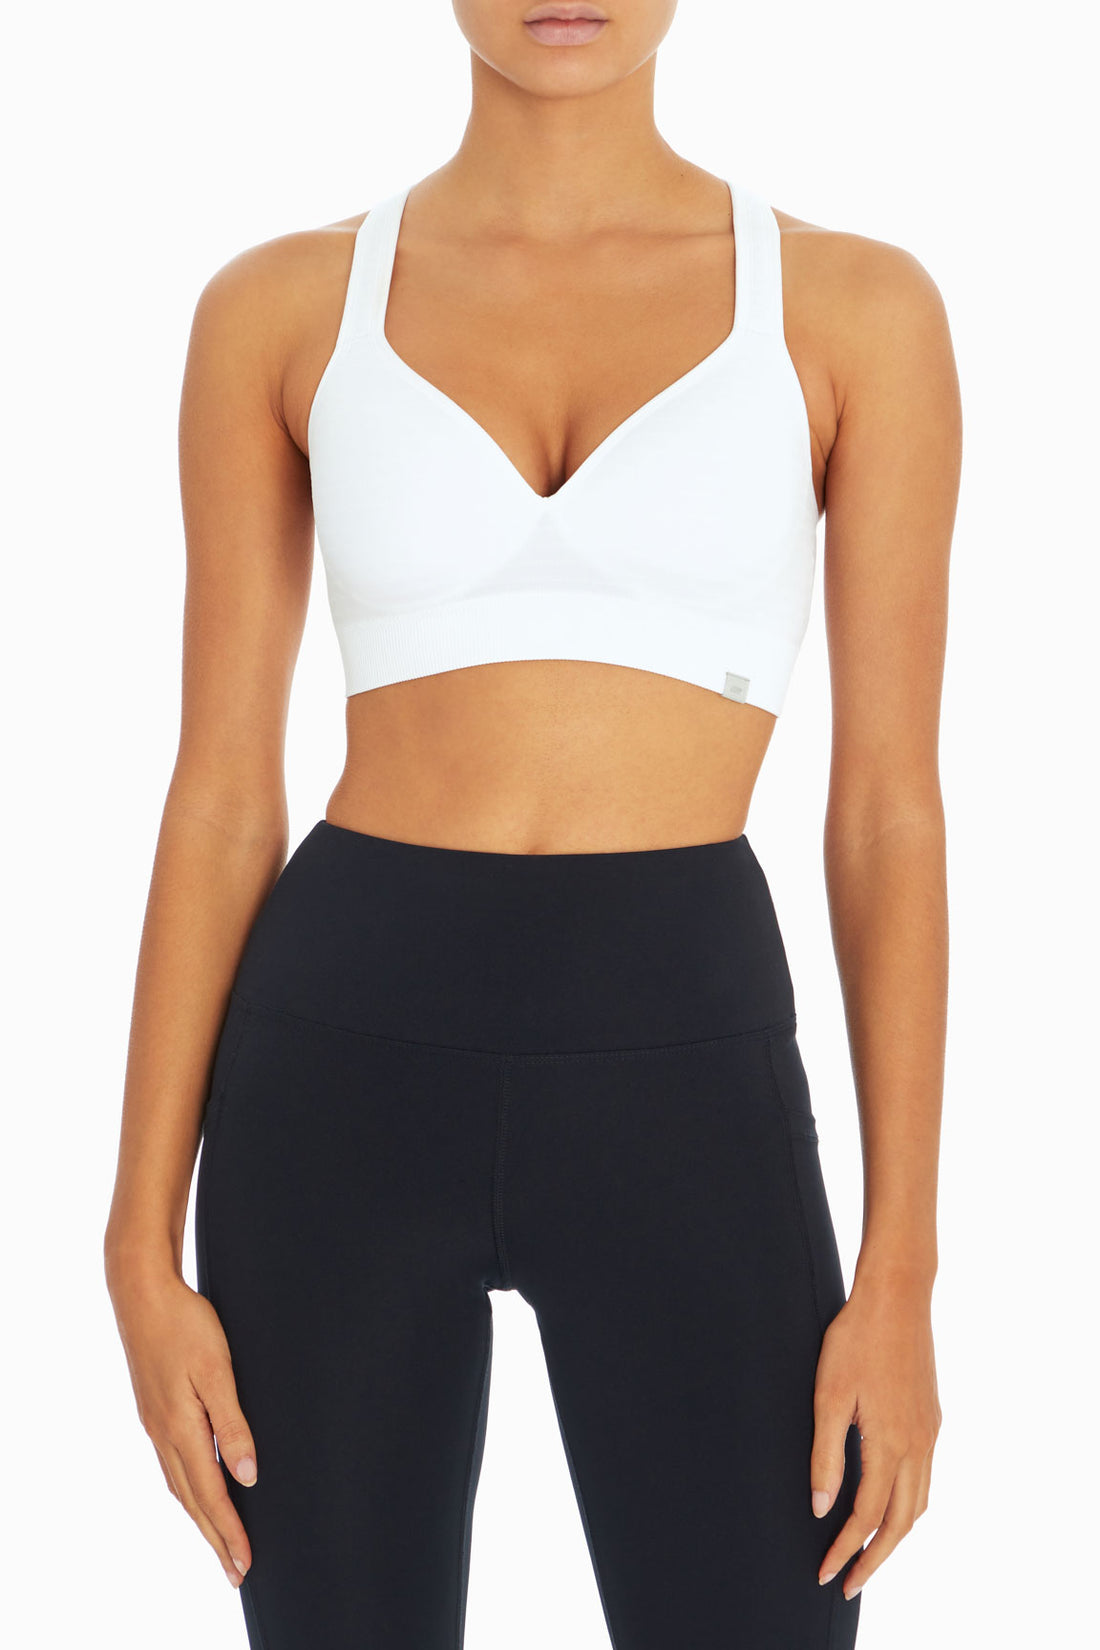 Sports bra with zip & moulded cups Singapore, Australia